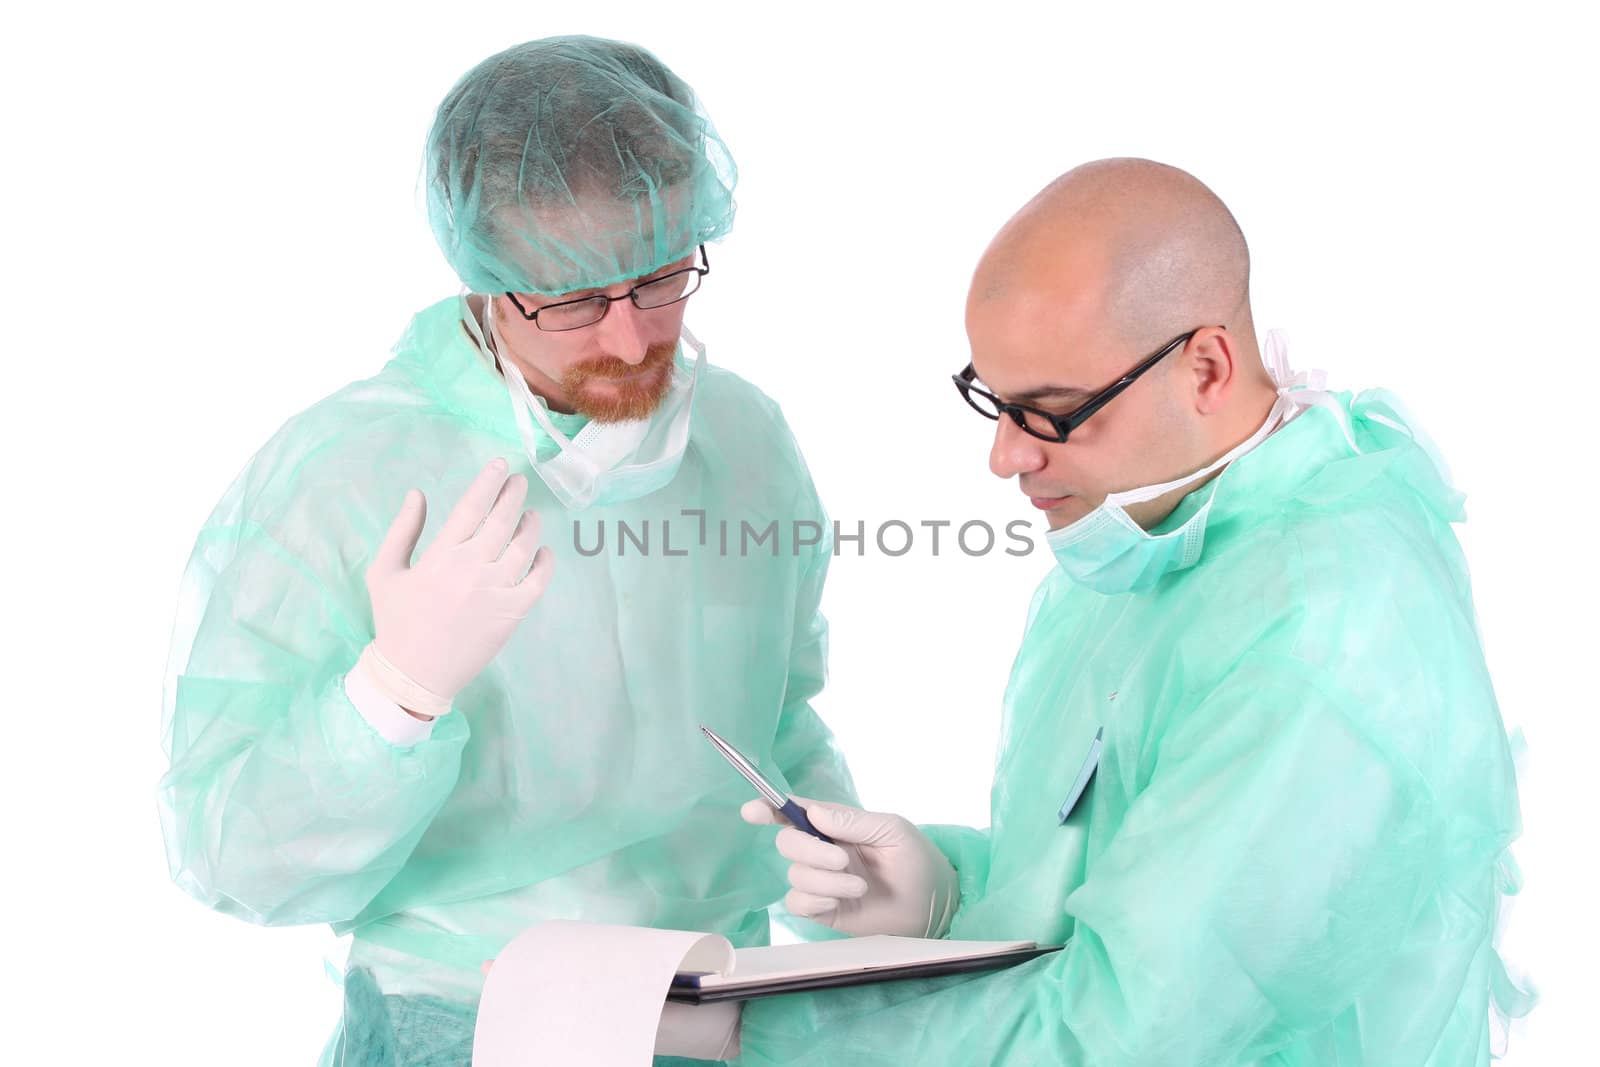 Details two surgeon with documents and pencil